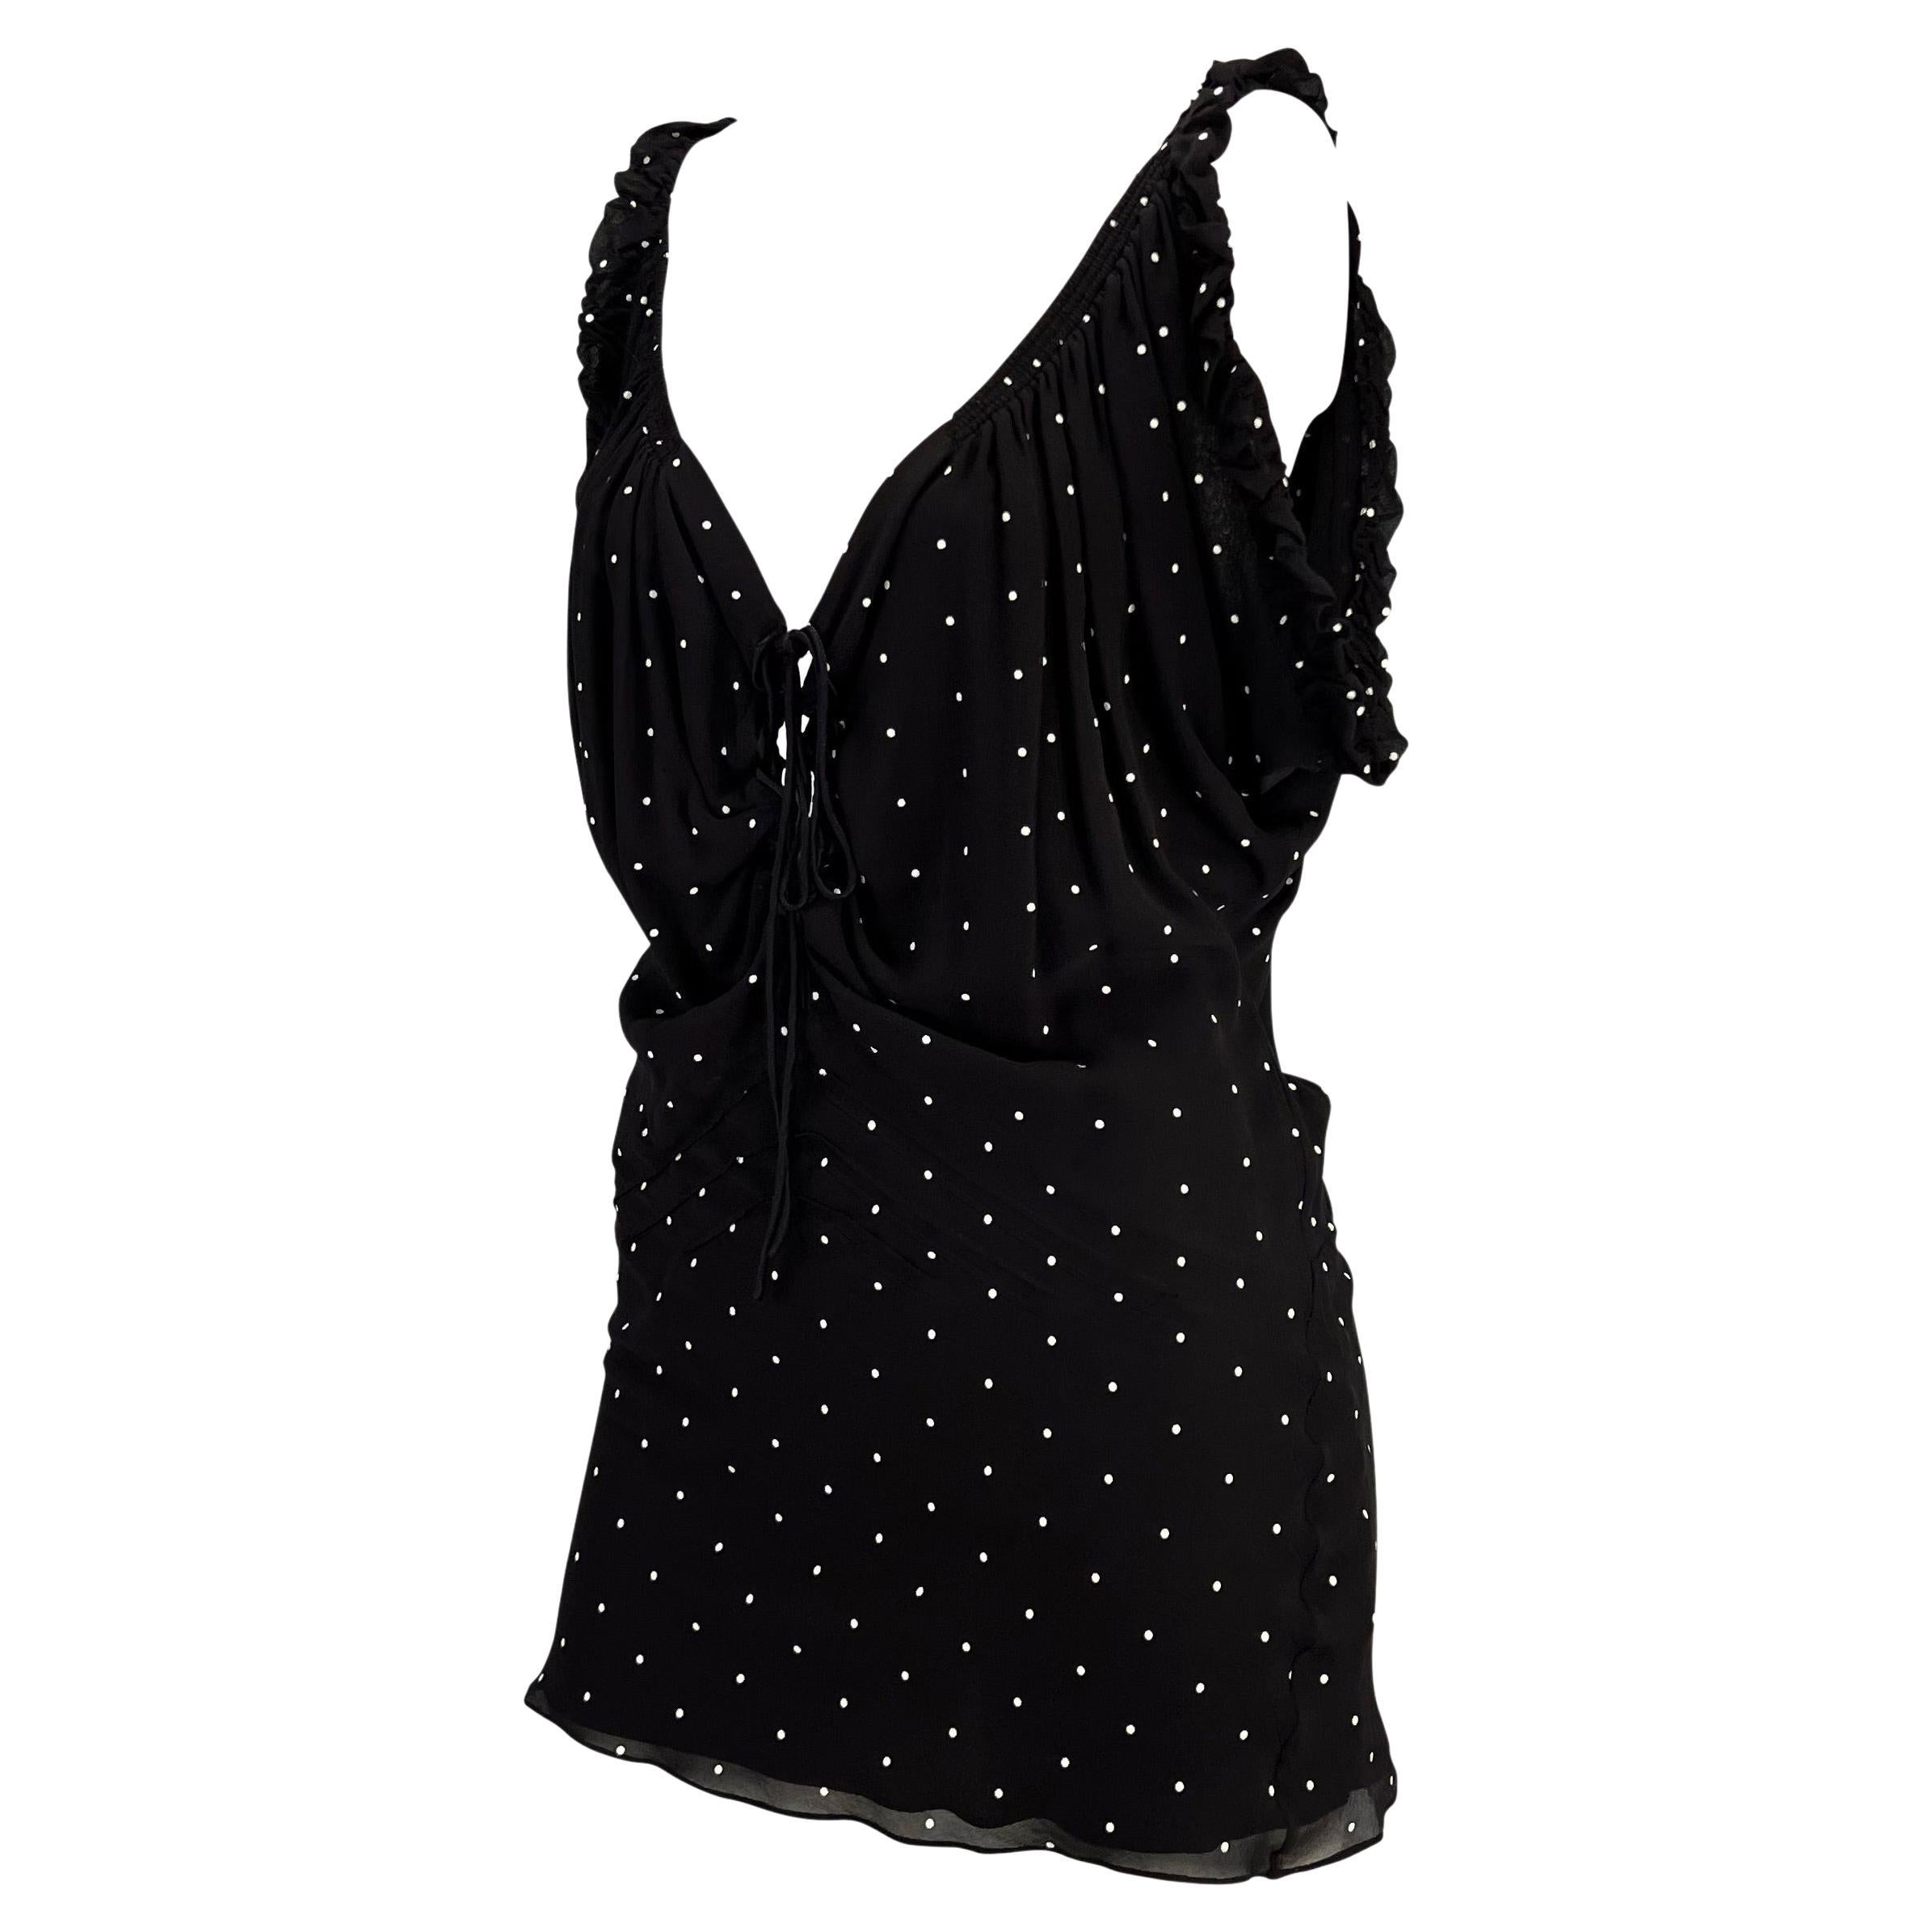 Presenting a sexy polka dot Gucci mini dress, designed by Tom Ford. From the Spring/Summer 2003 collection, this black dress with white dots features winged underarms, a v-neckline, and a low scooped back. Made complete with a small opening and tie